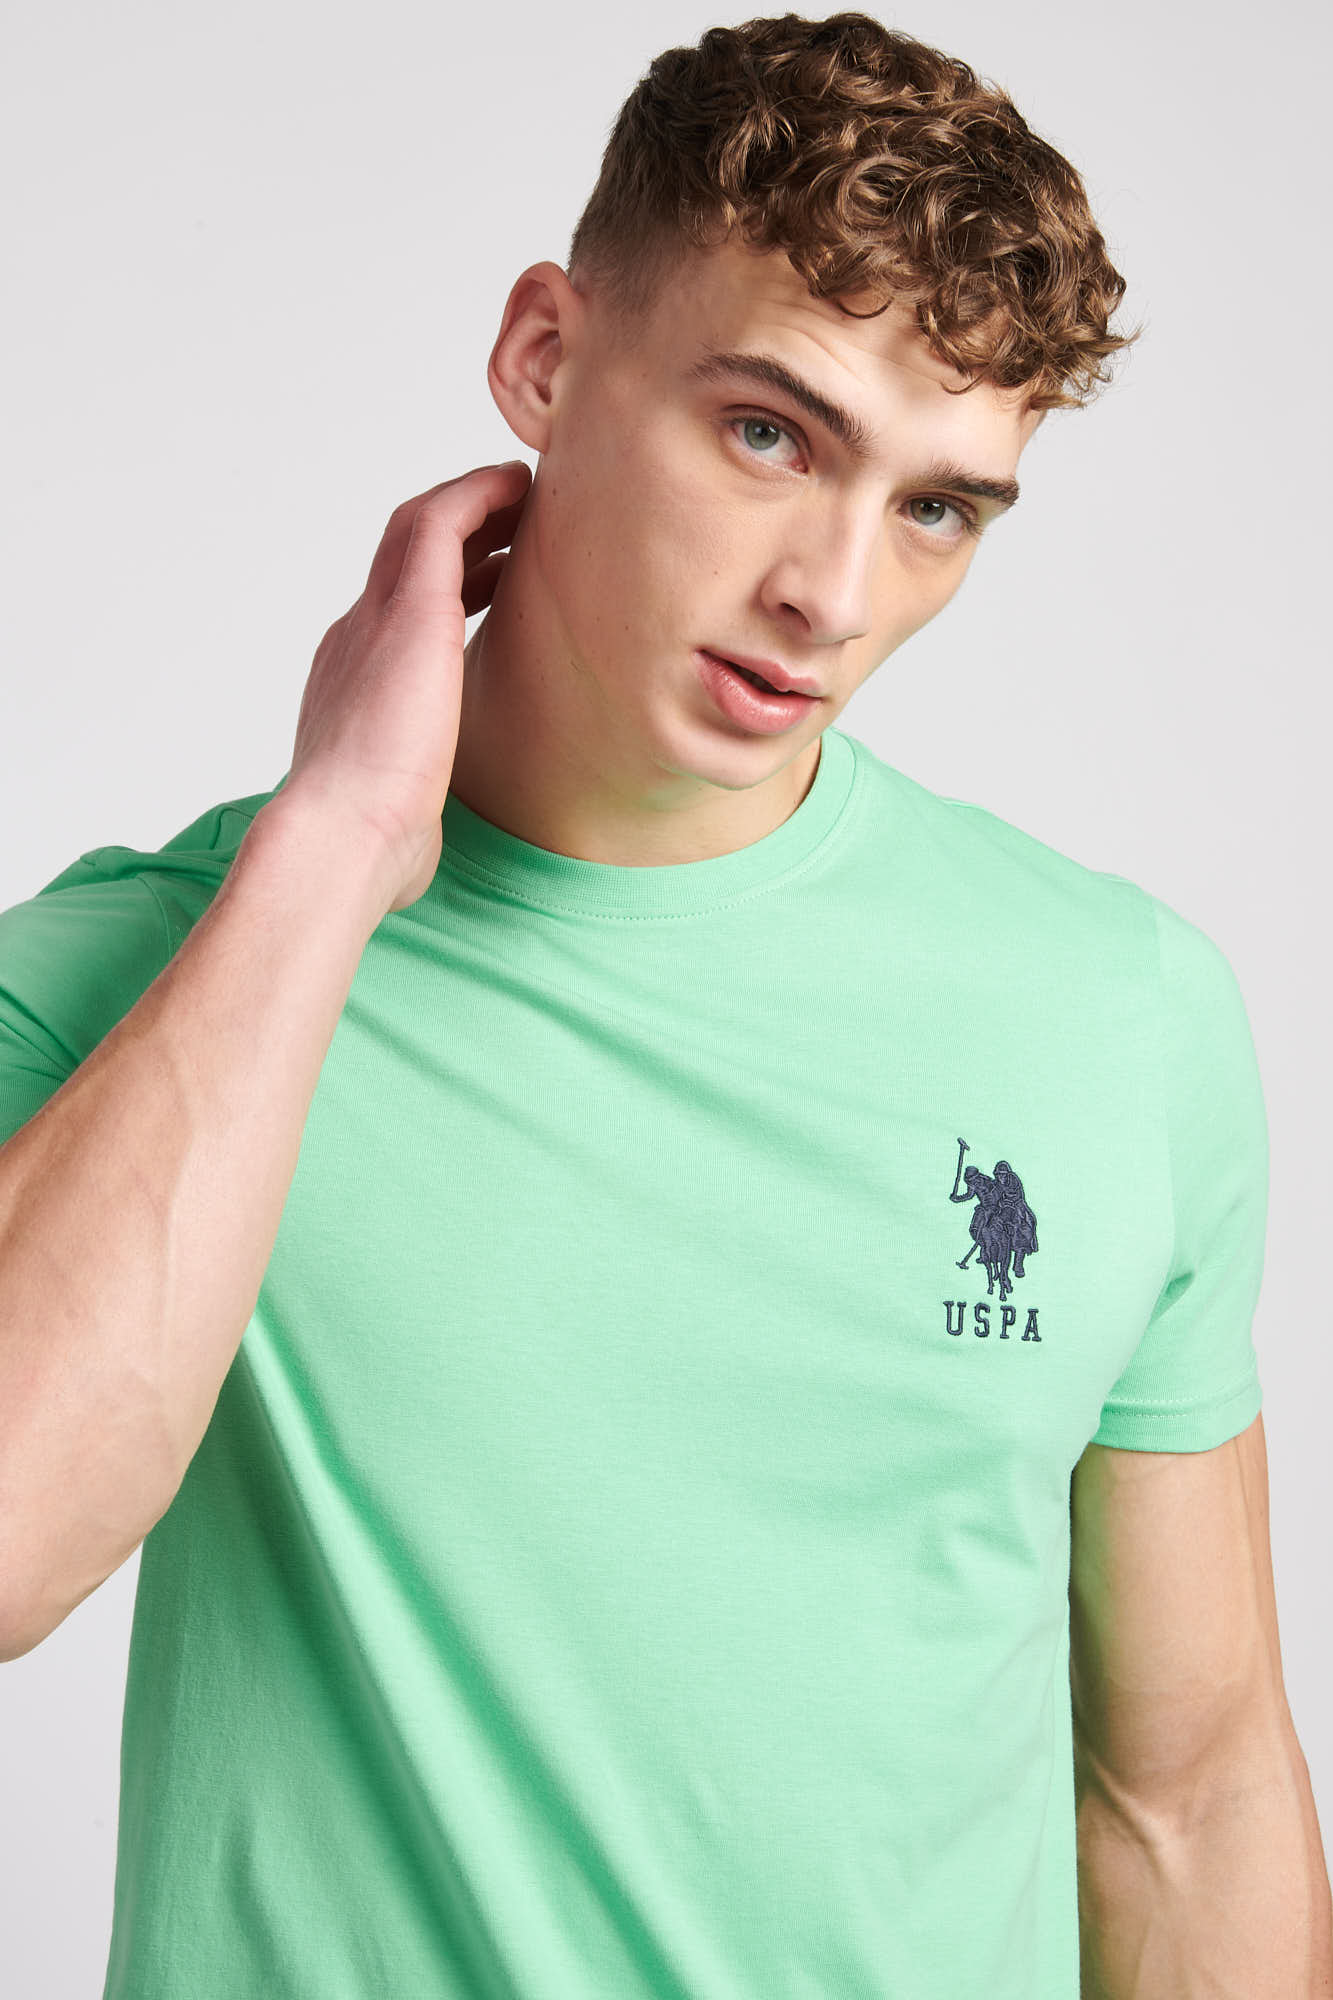 Mens Player 3 T-Shirt in Spring Bud